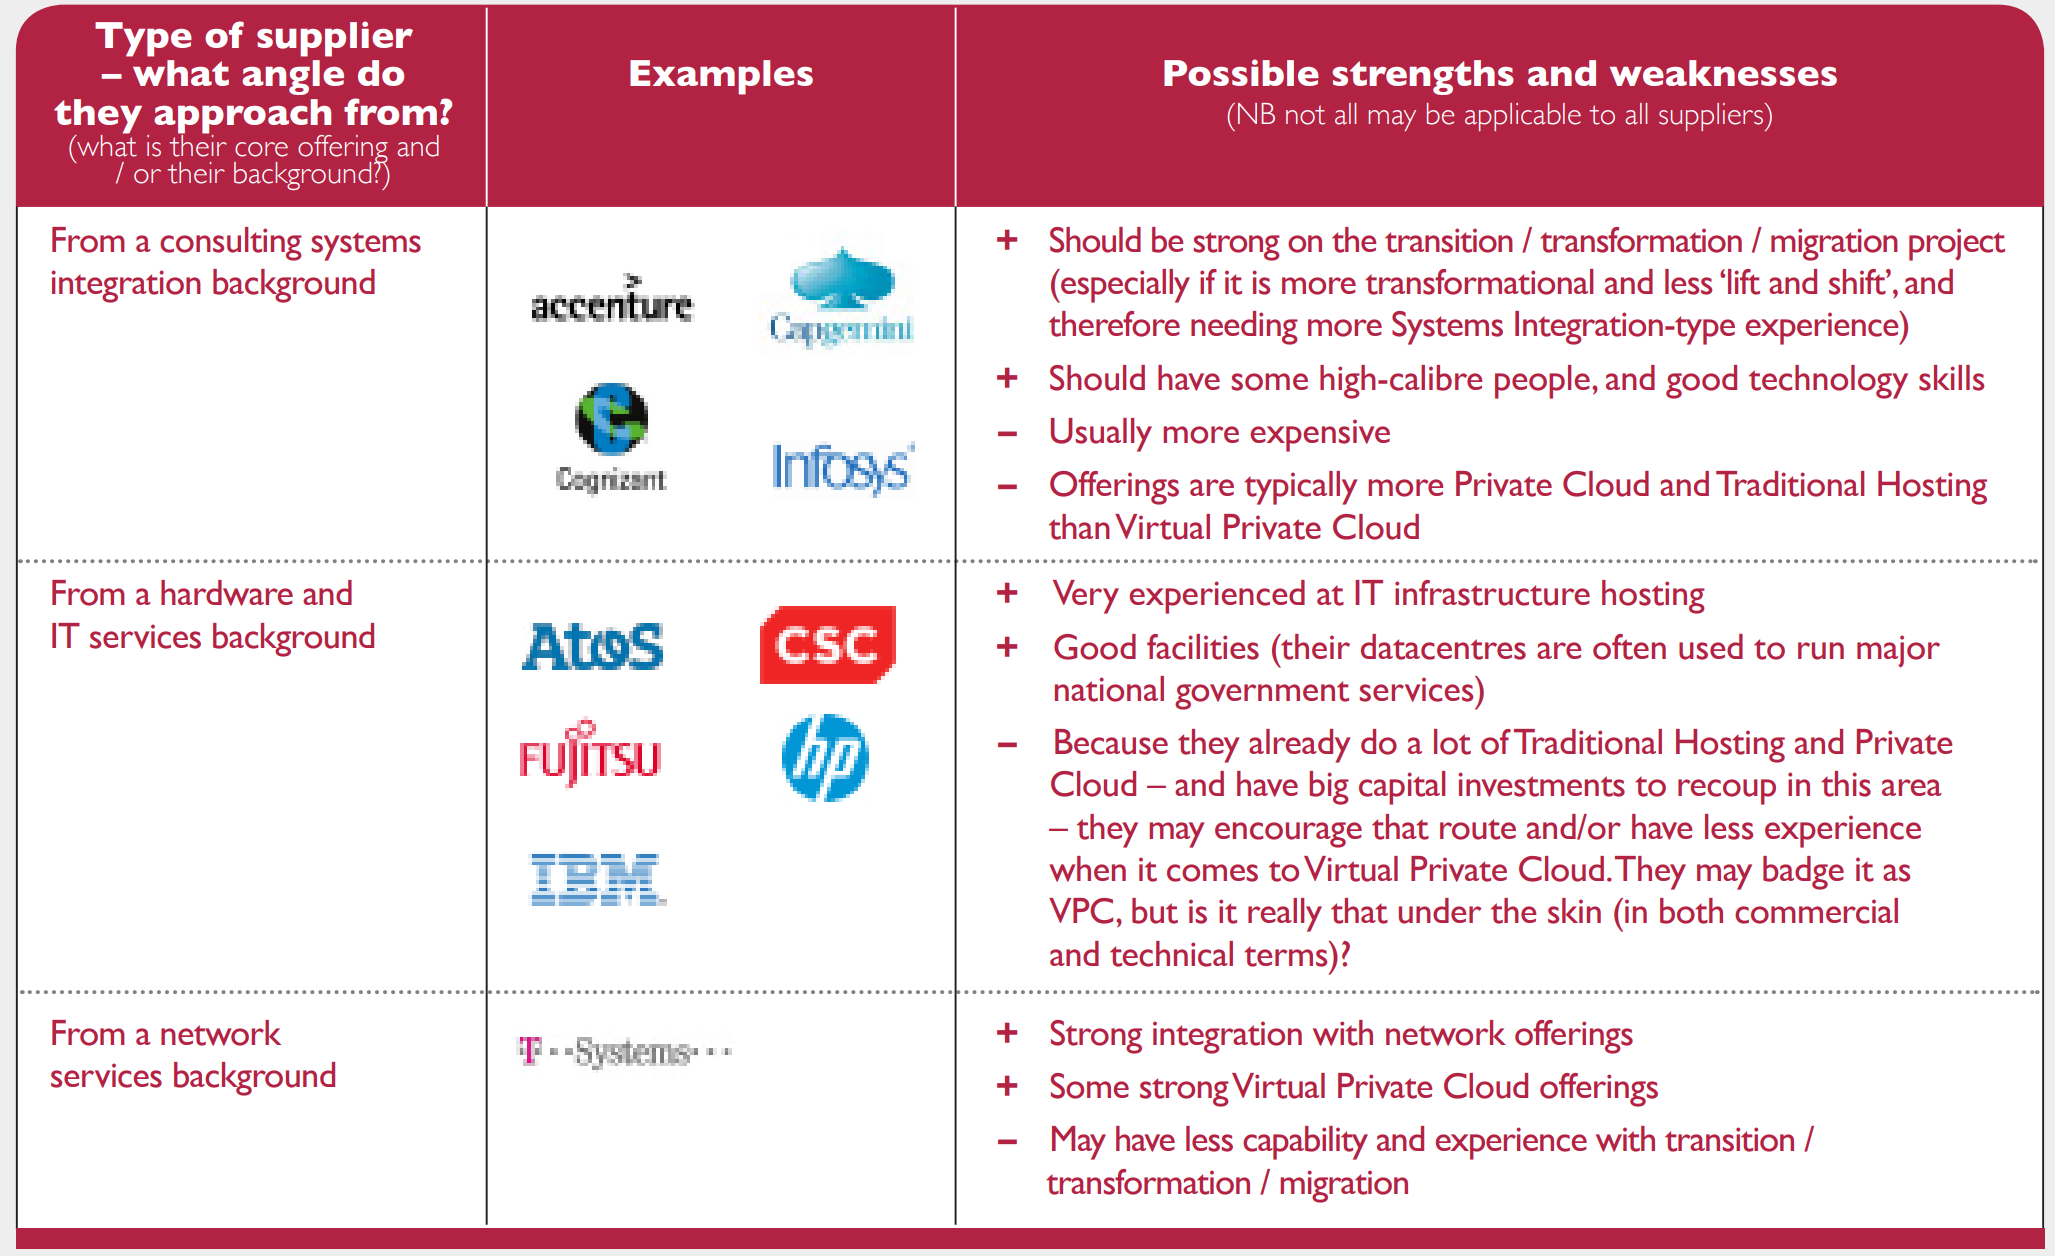 Examples of supplies and their approaches to moving data centres to the cloud.